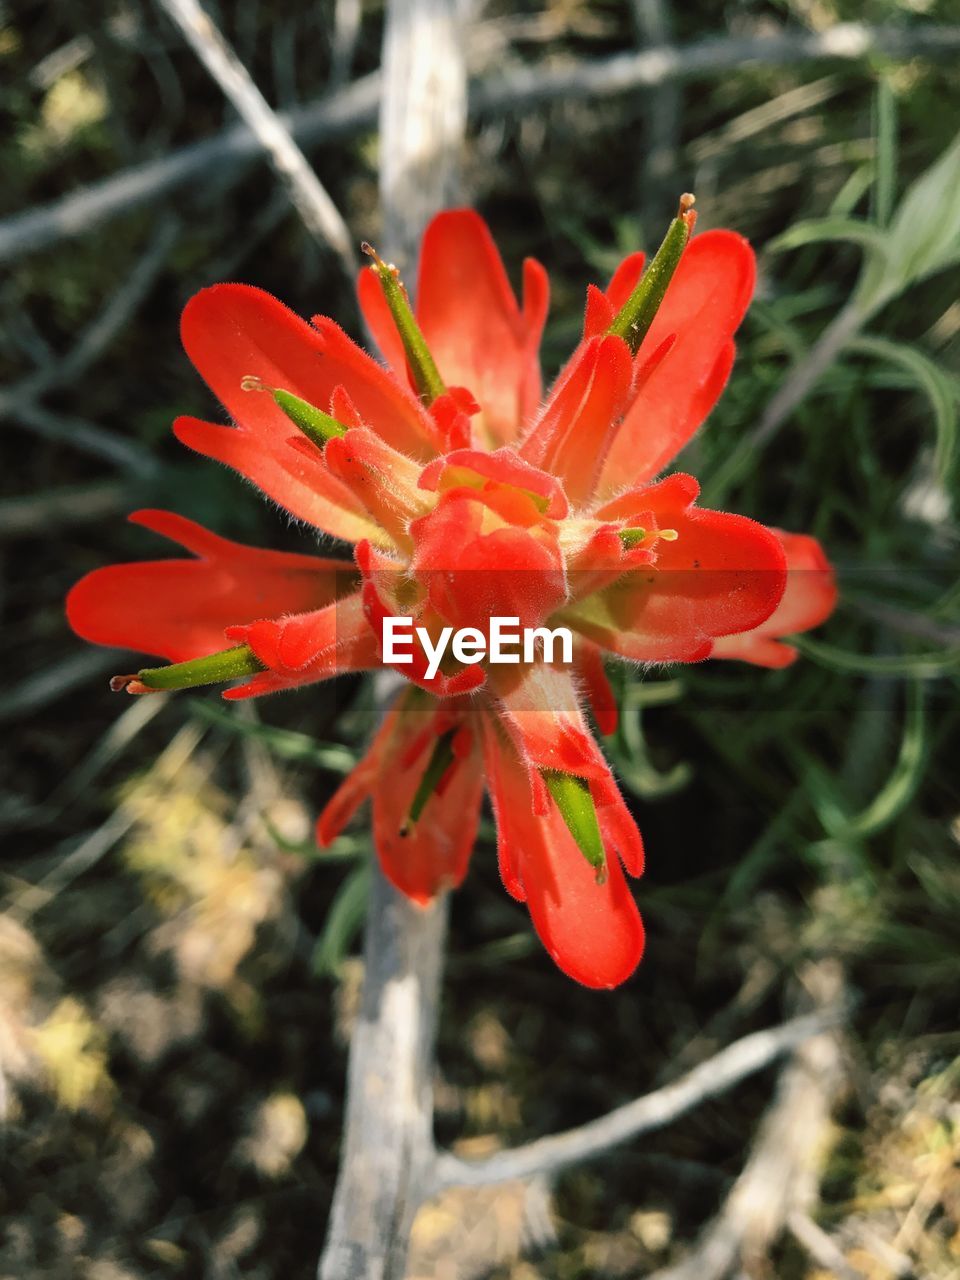 CLOSE-UP OF RED FLOWER BLOOMING IN PARK